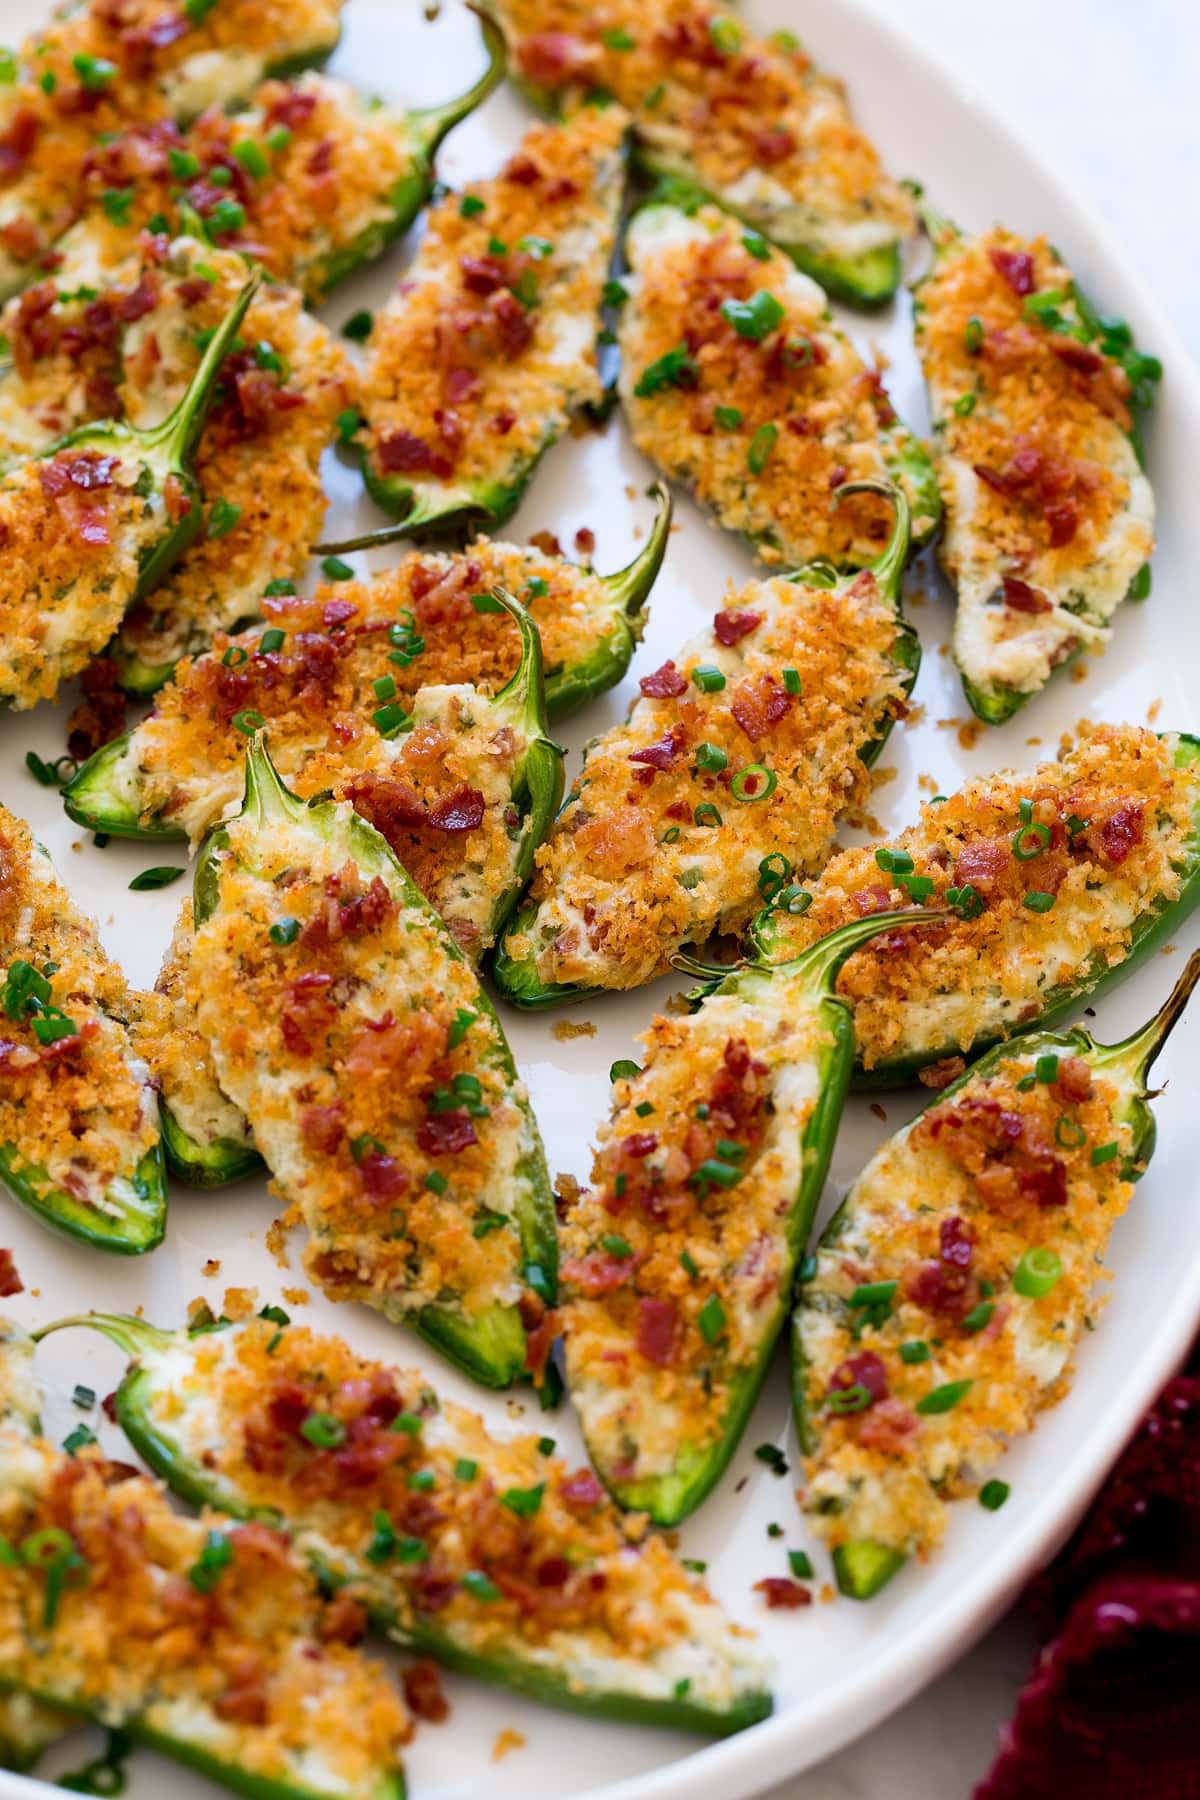 Jalapeno poppers shown from side angle.